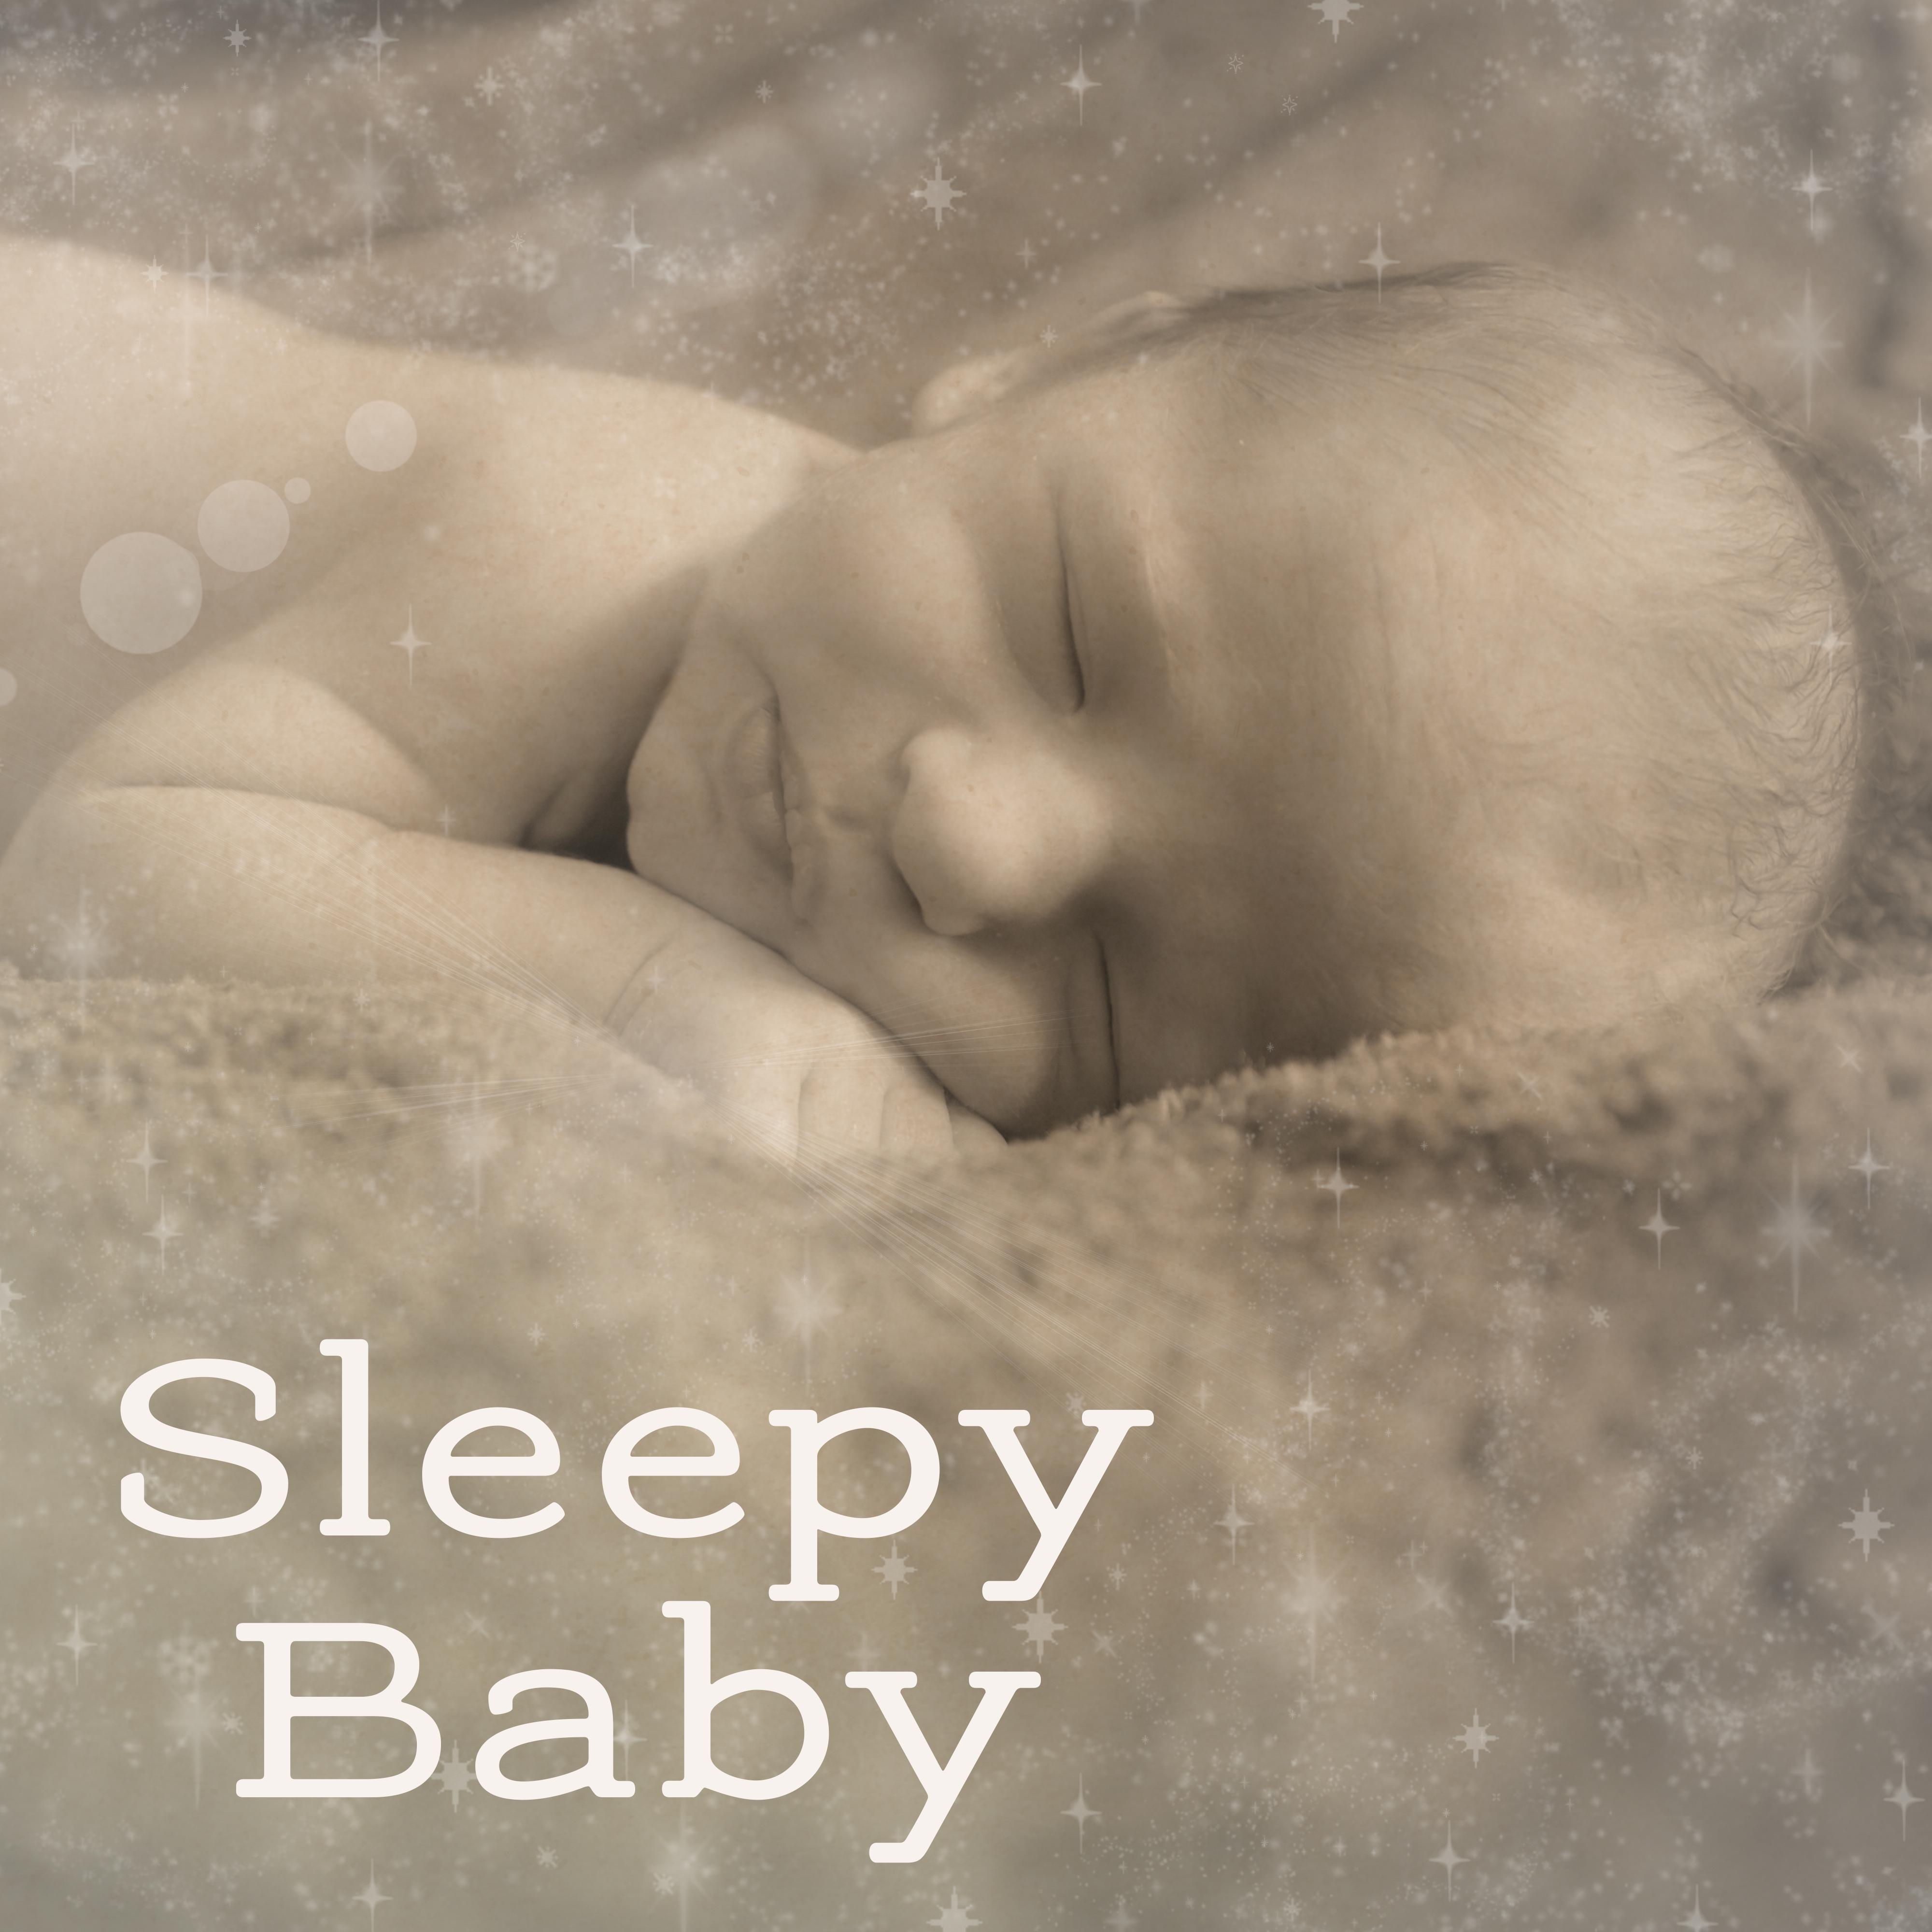 Sleepy Baby – Relaxing Lullabies for Baby, Stress Relief, Sweet Dreams, Cradle Songs, Soothing Nature Sounds at Goodnight, Baby Music